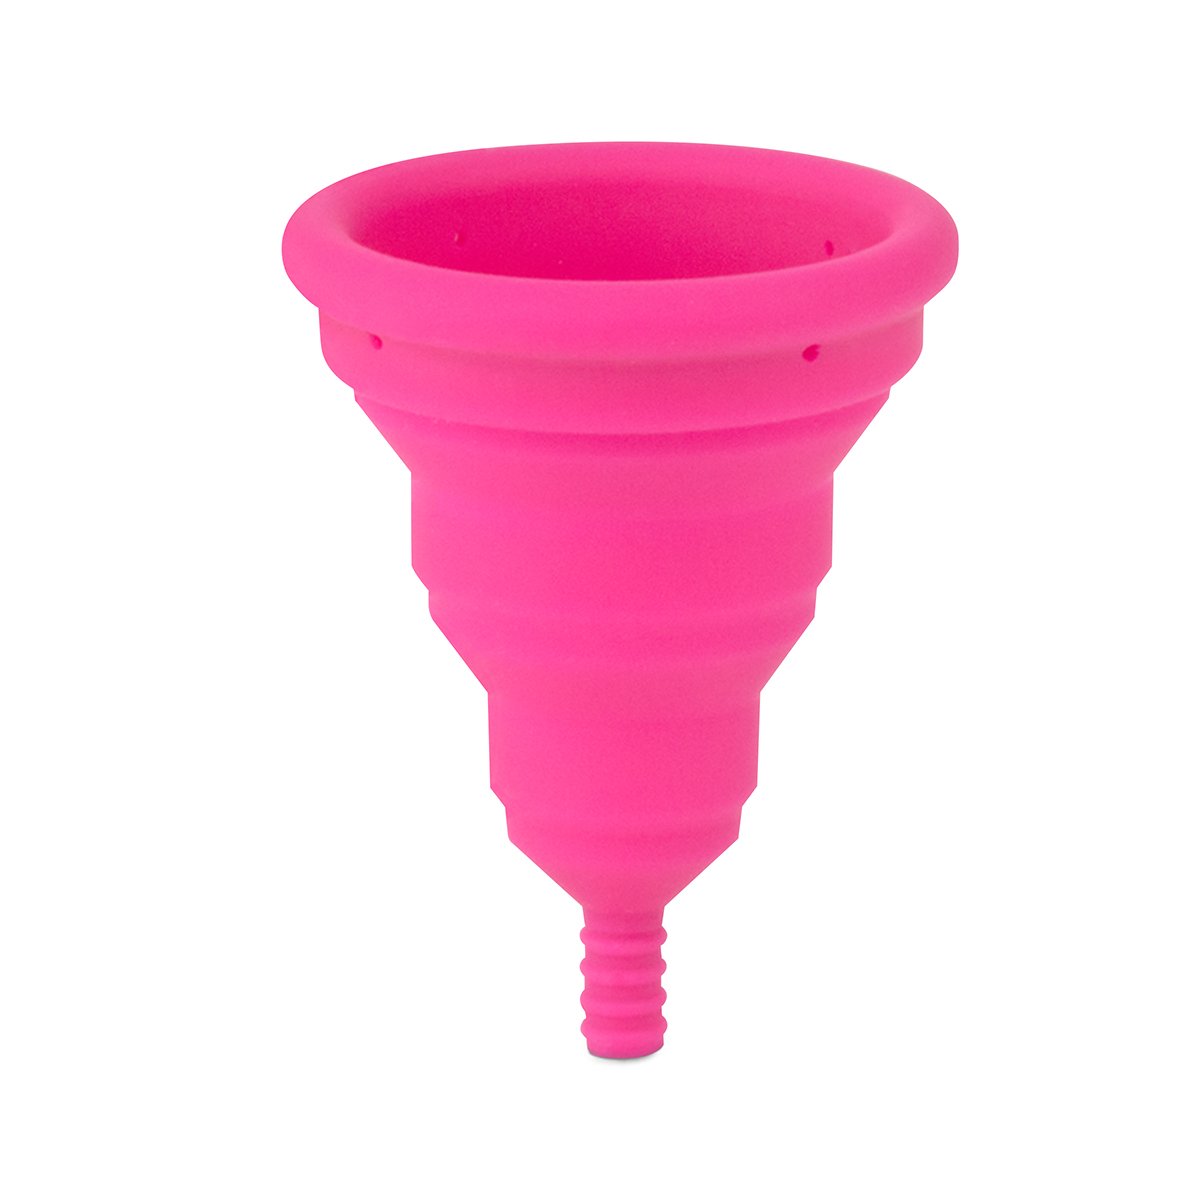 COPA MENSTRUAL LILLY CUP COMPACT INTIMINA